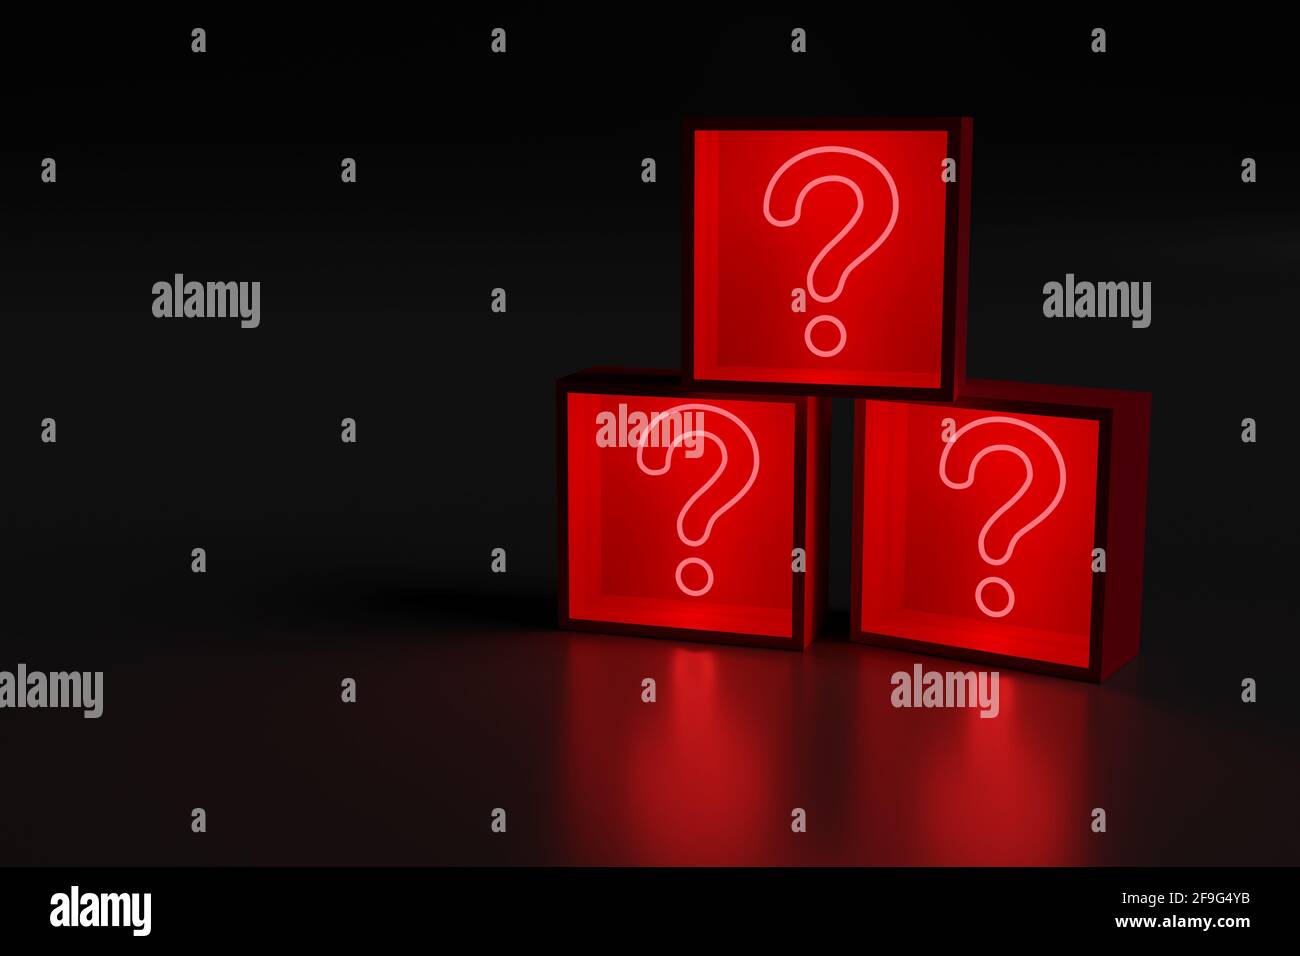 Red neon light in the shape of a question mark in boxes. 3d illustration. Stock Photo